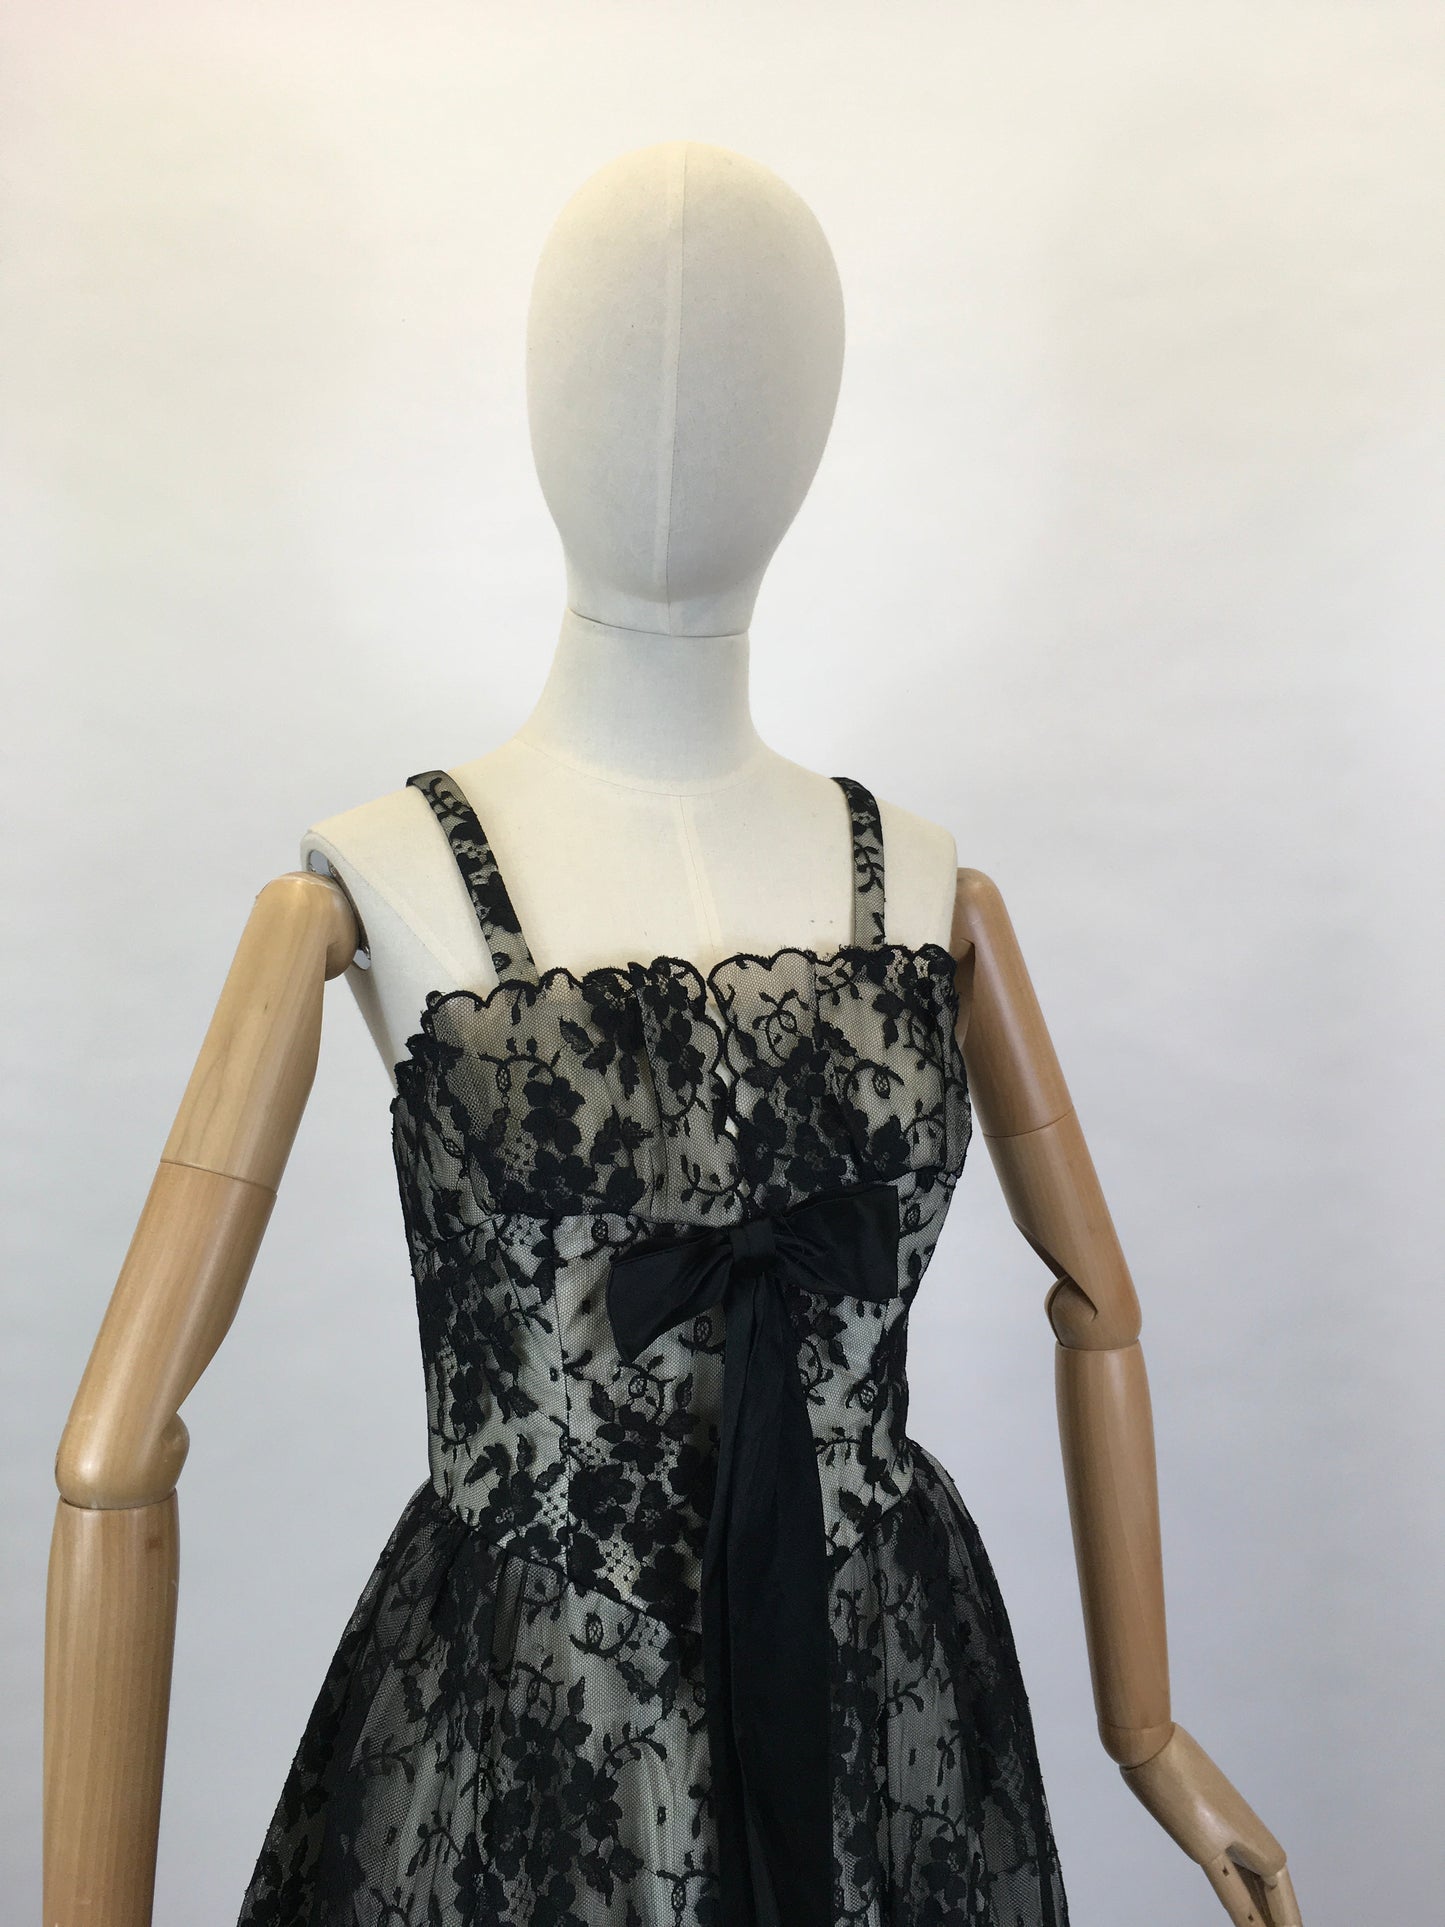 Original 1950’s Little Black Dress - With Lace Overlay and Stunning Details